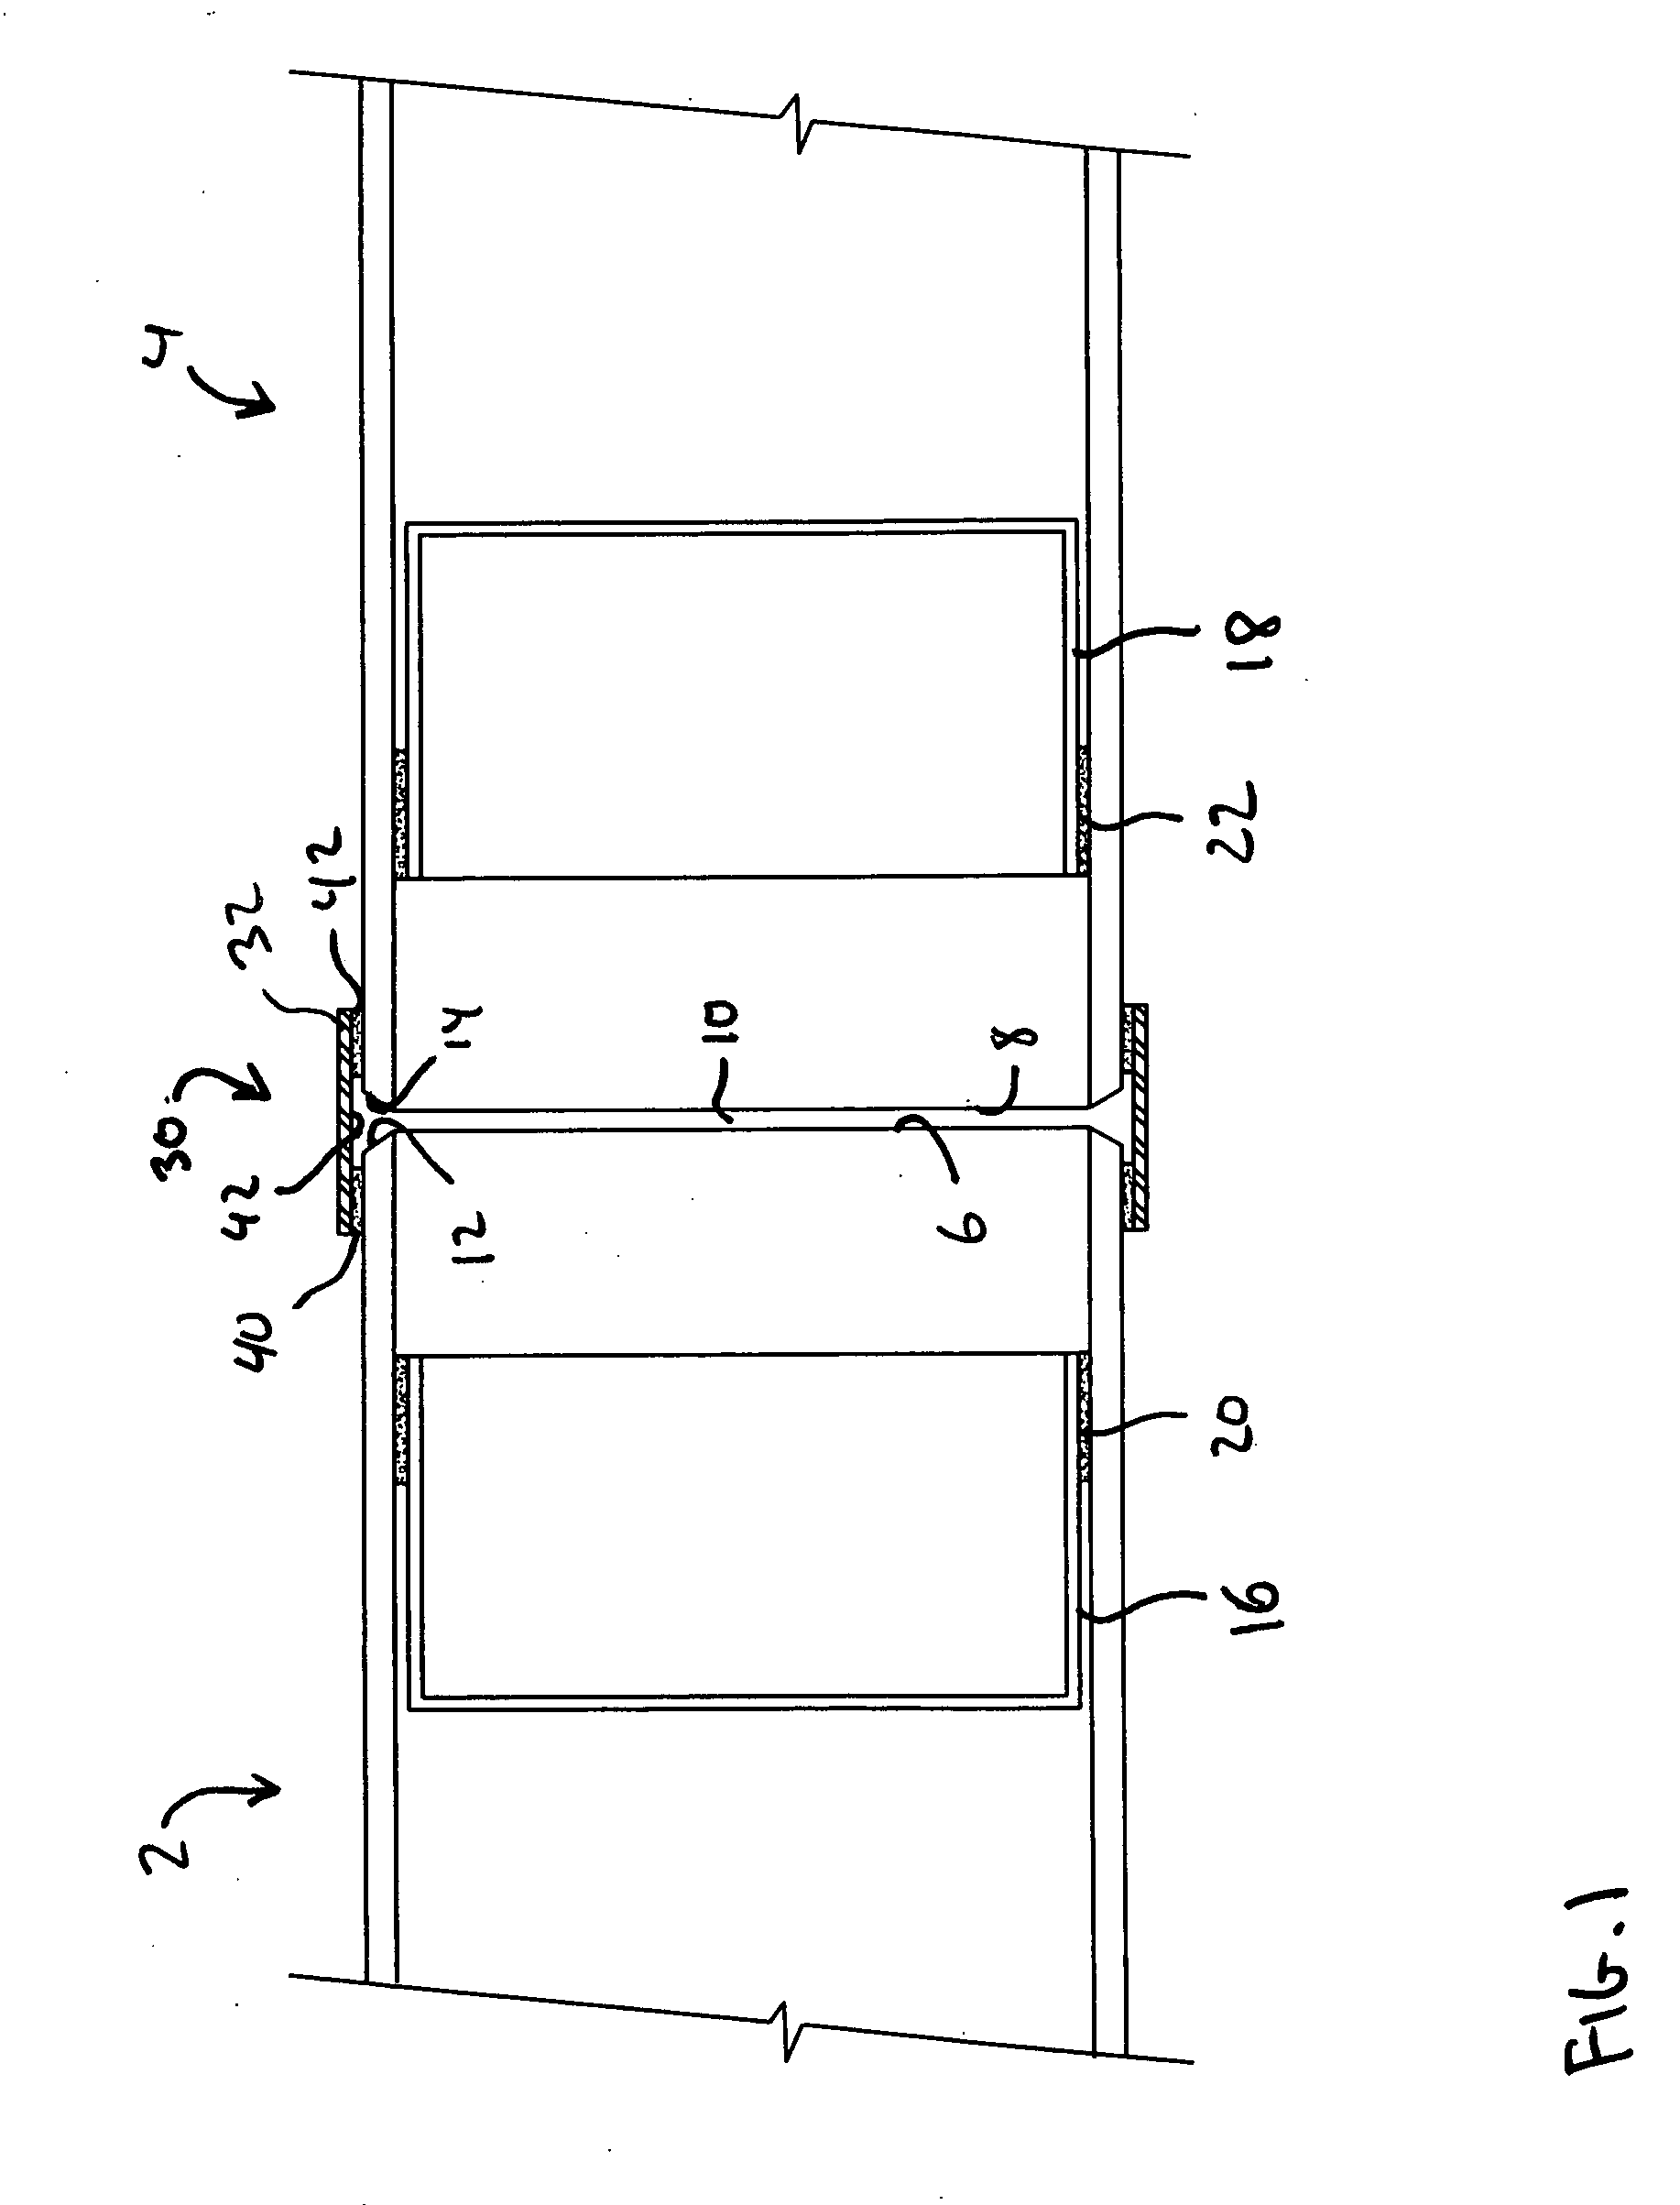 Welding tape and related taping method